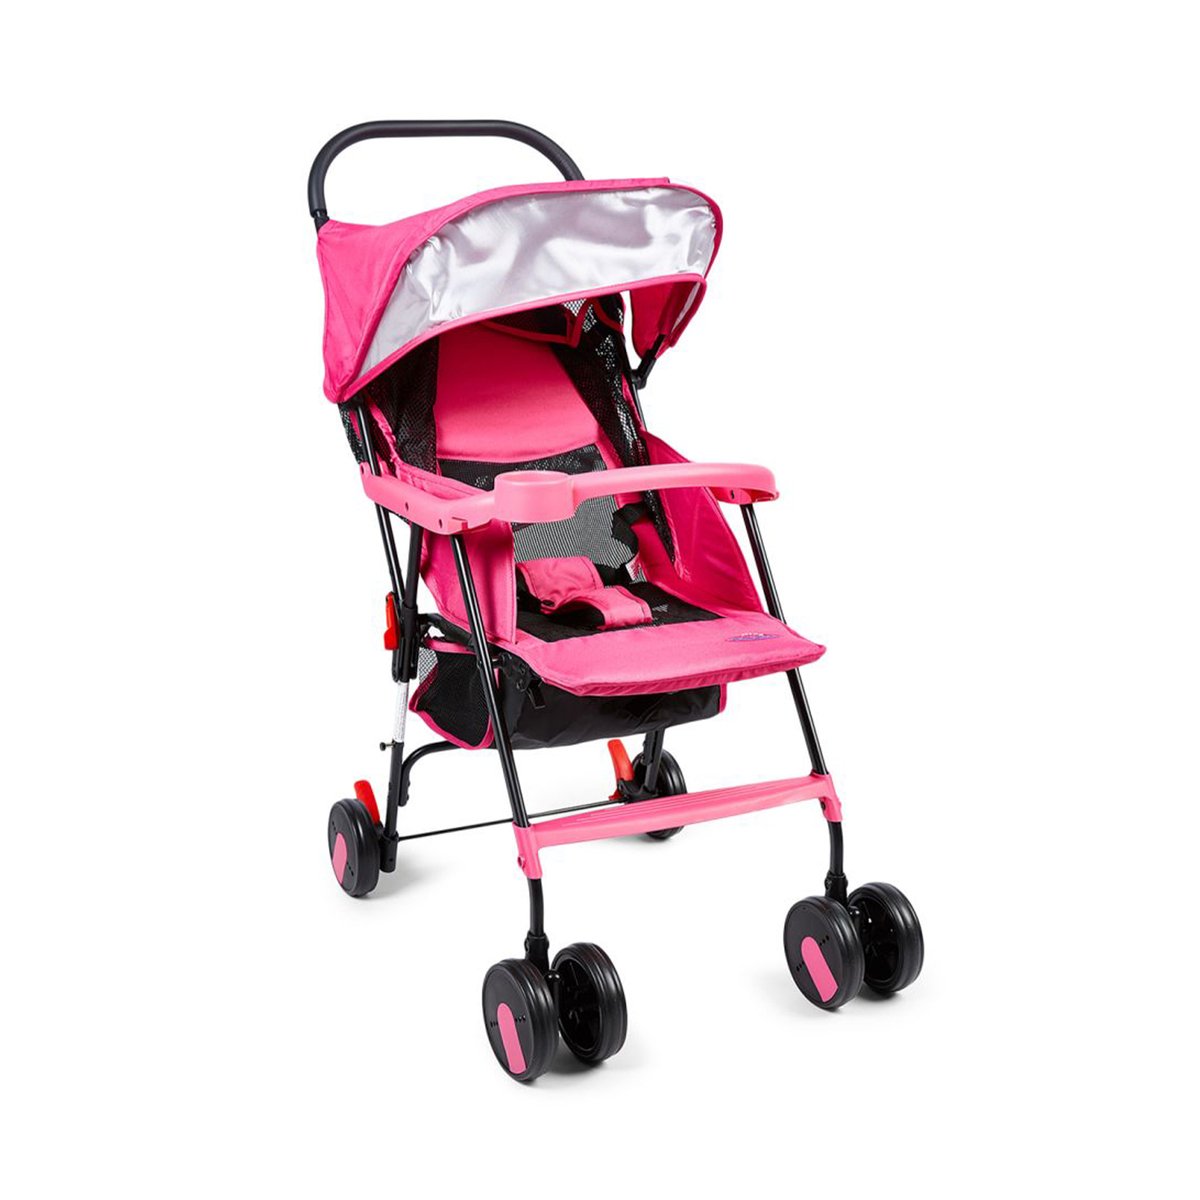 Little Angel Baby Stroller ZZ-04 Assorted Colors